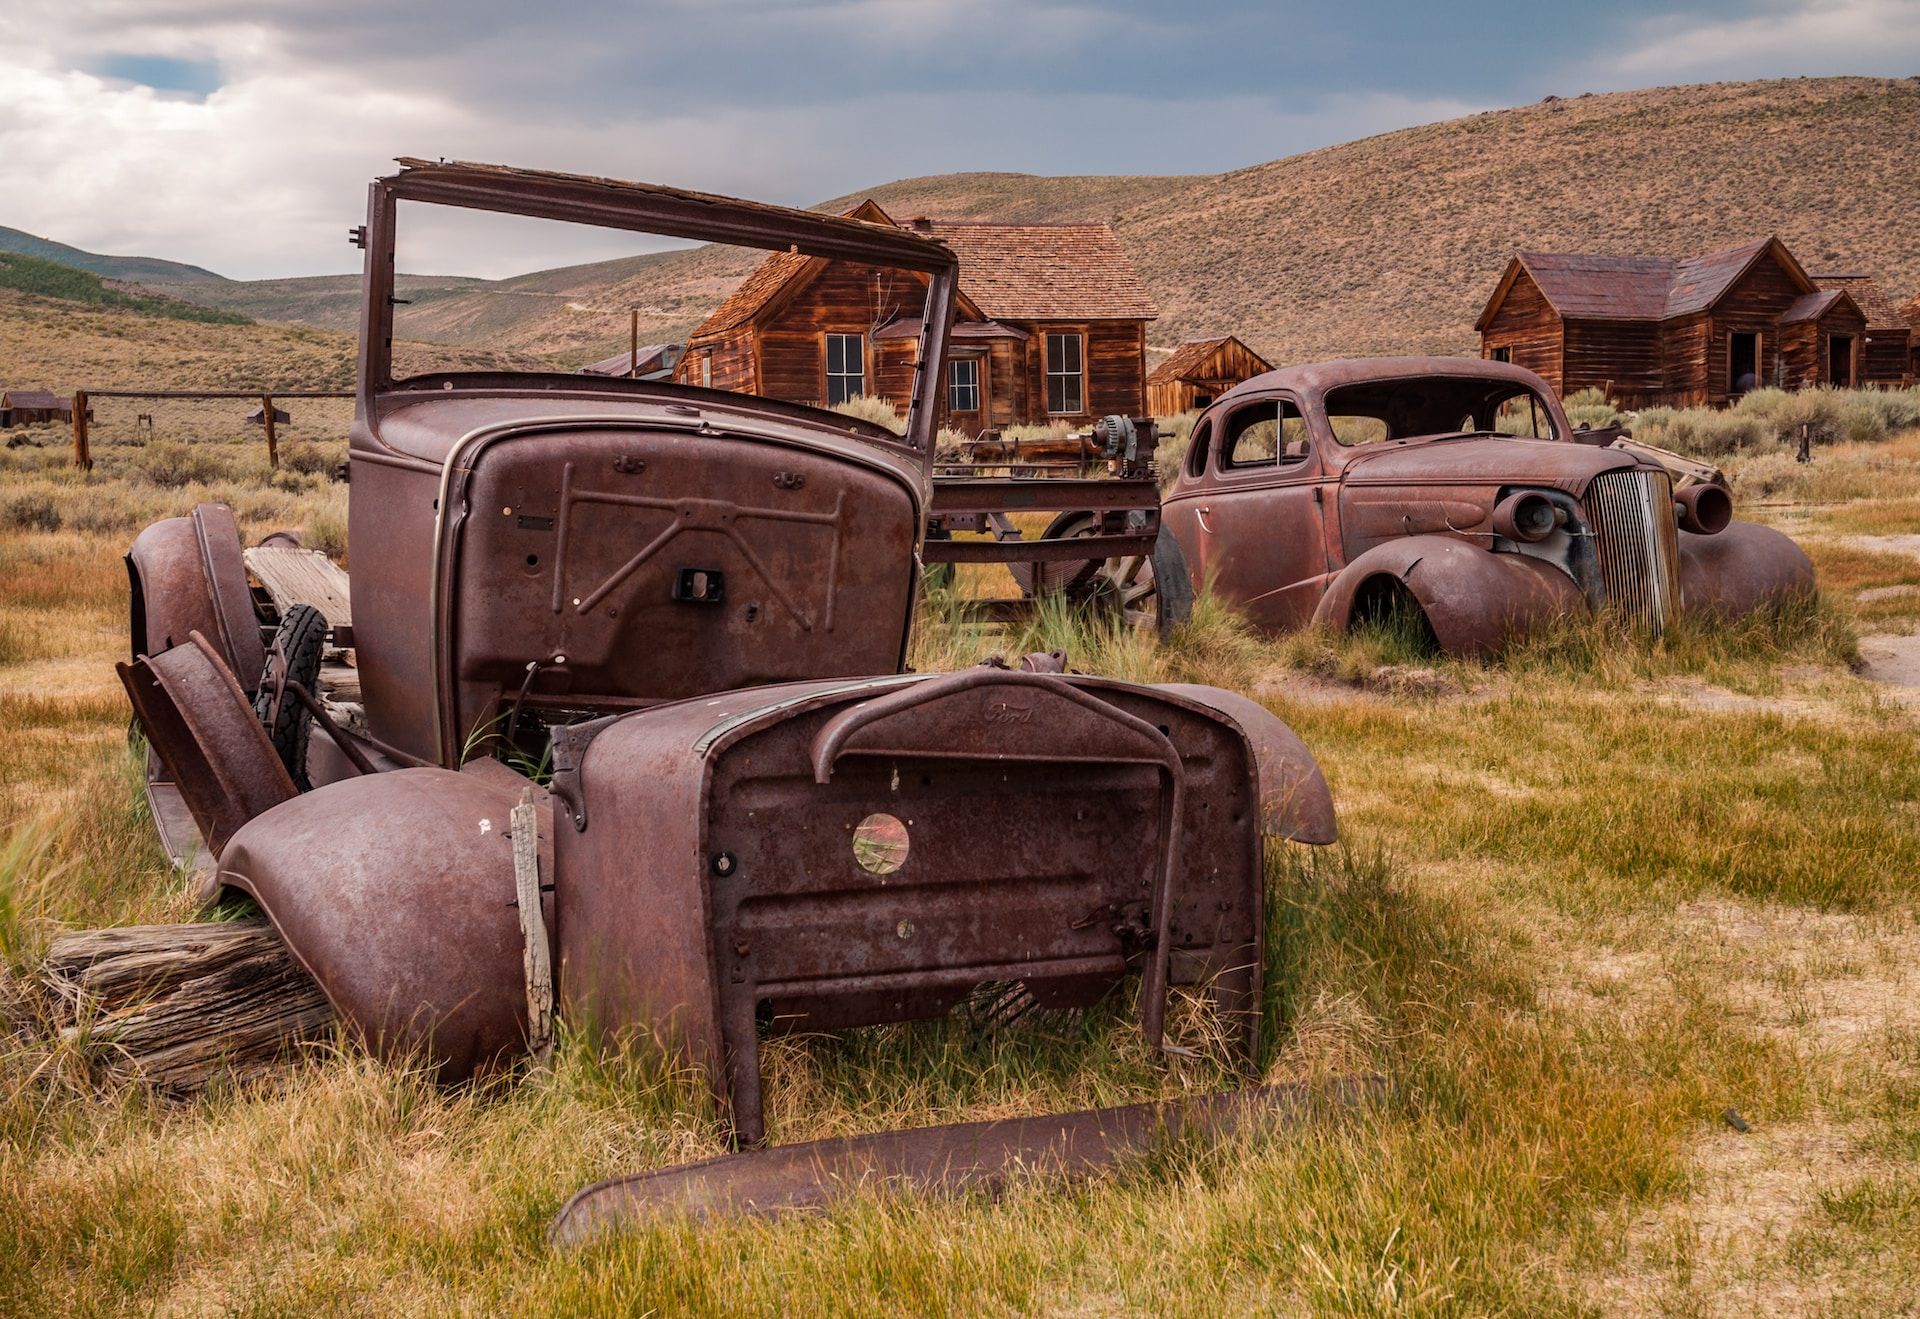 The forgotten town of Bodie, California